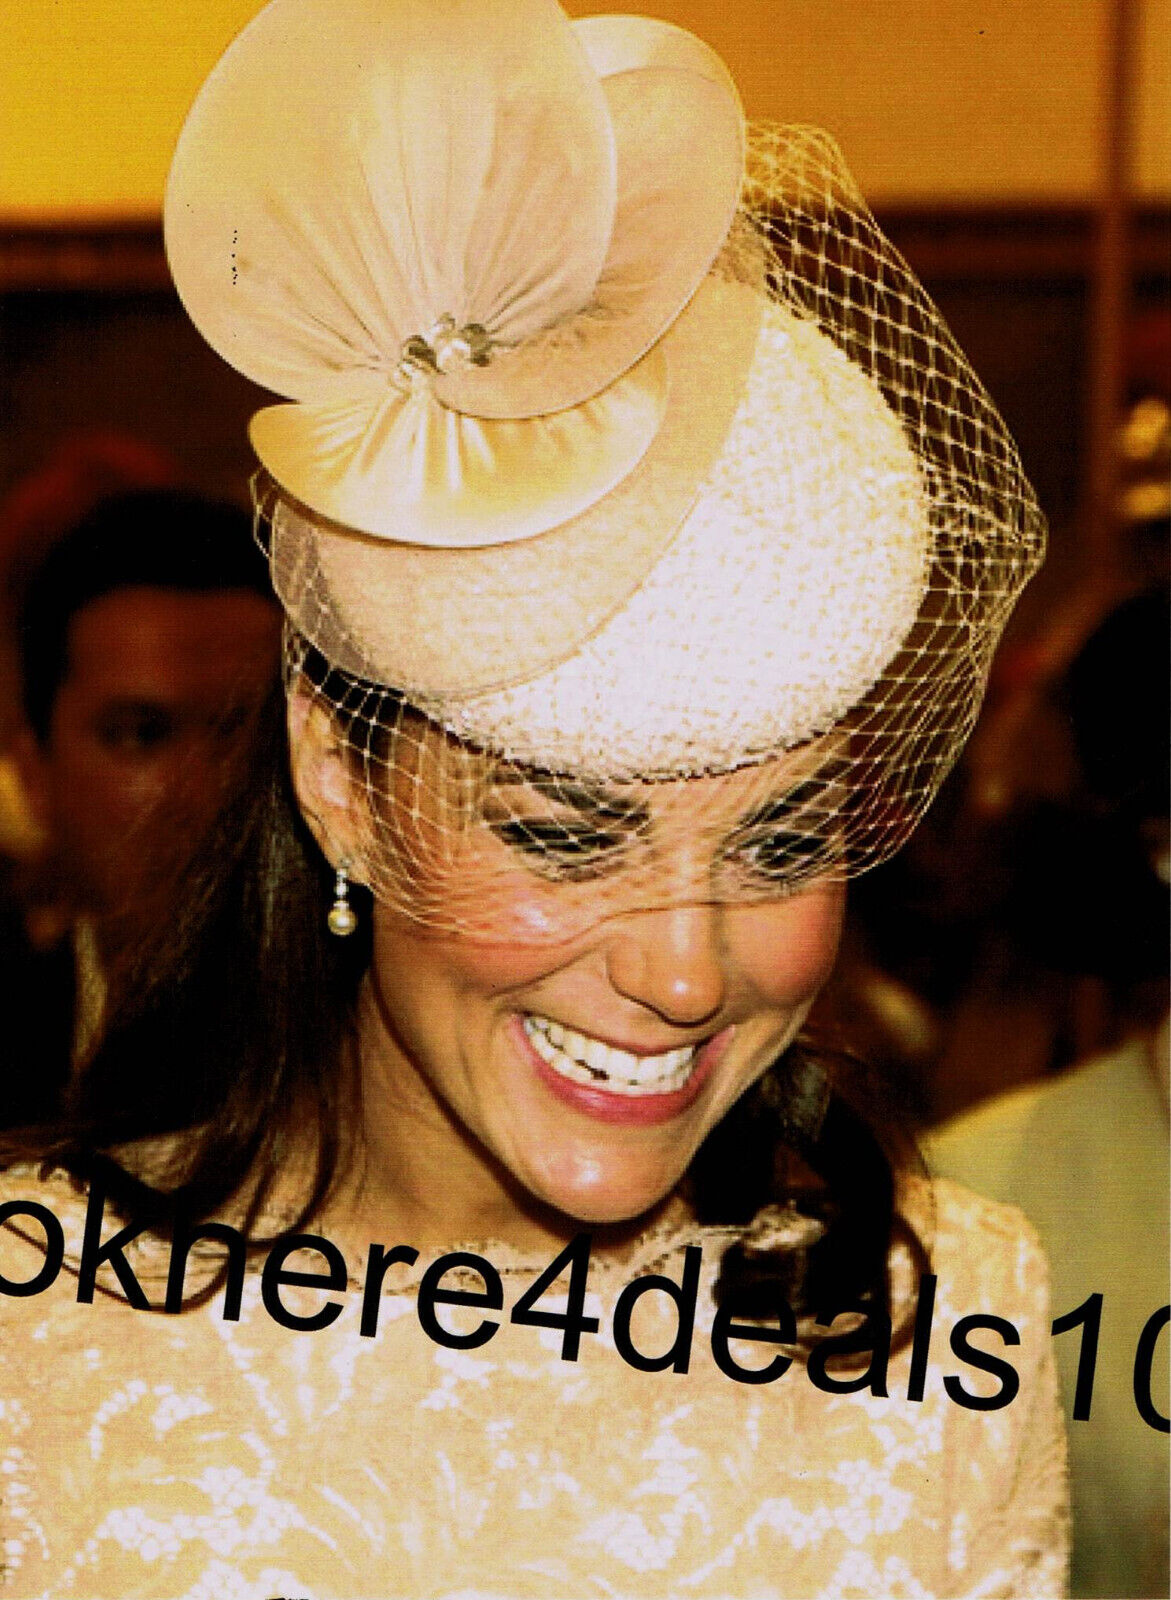 Kate Middleton Photo 8x10 Royal Collectibles Great Britain London England Без бренда